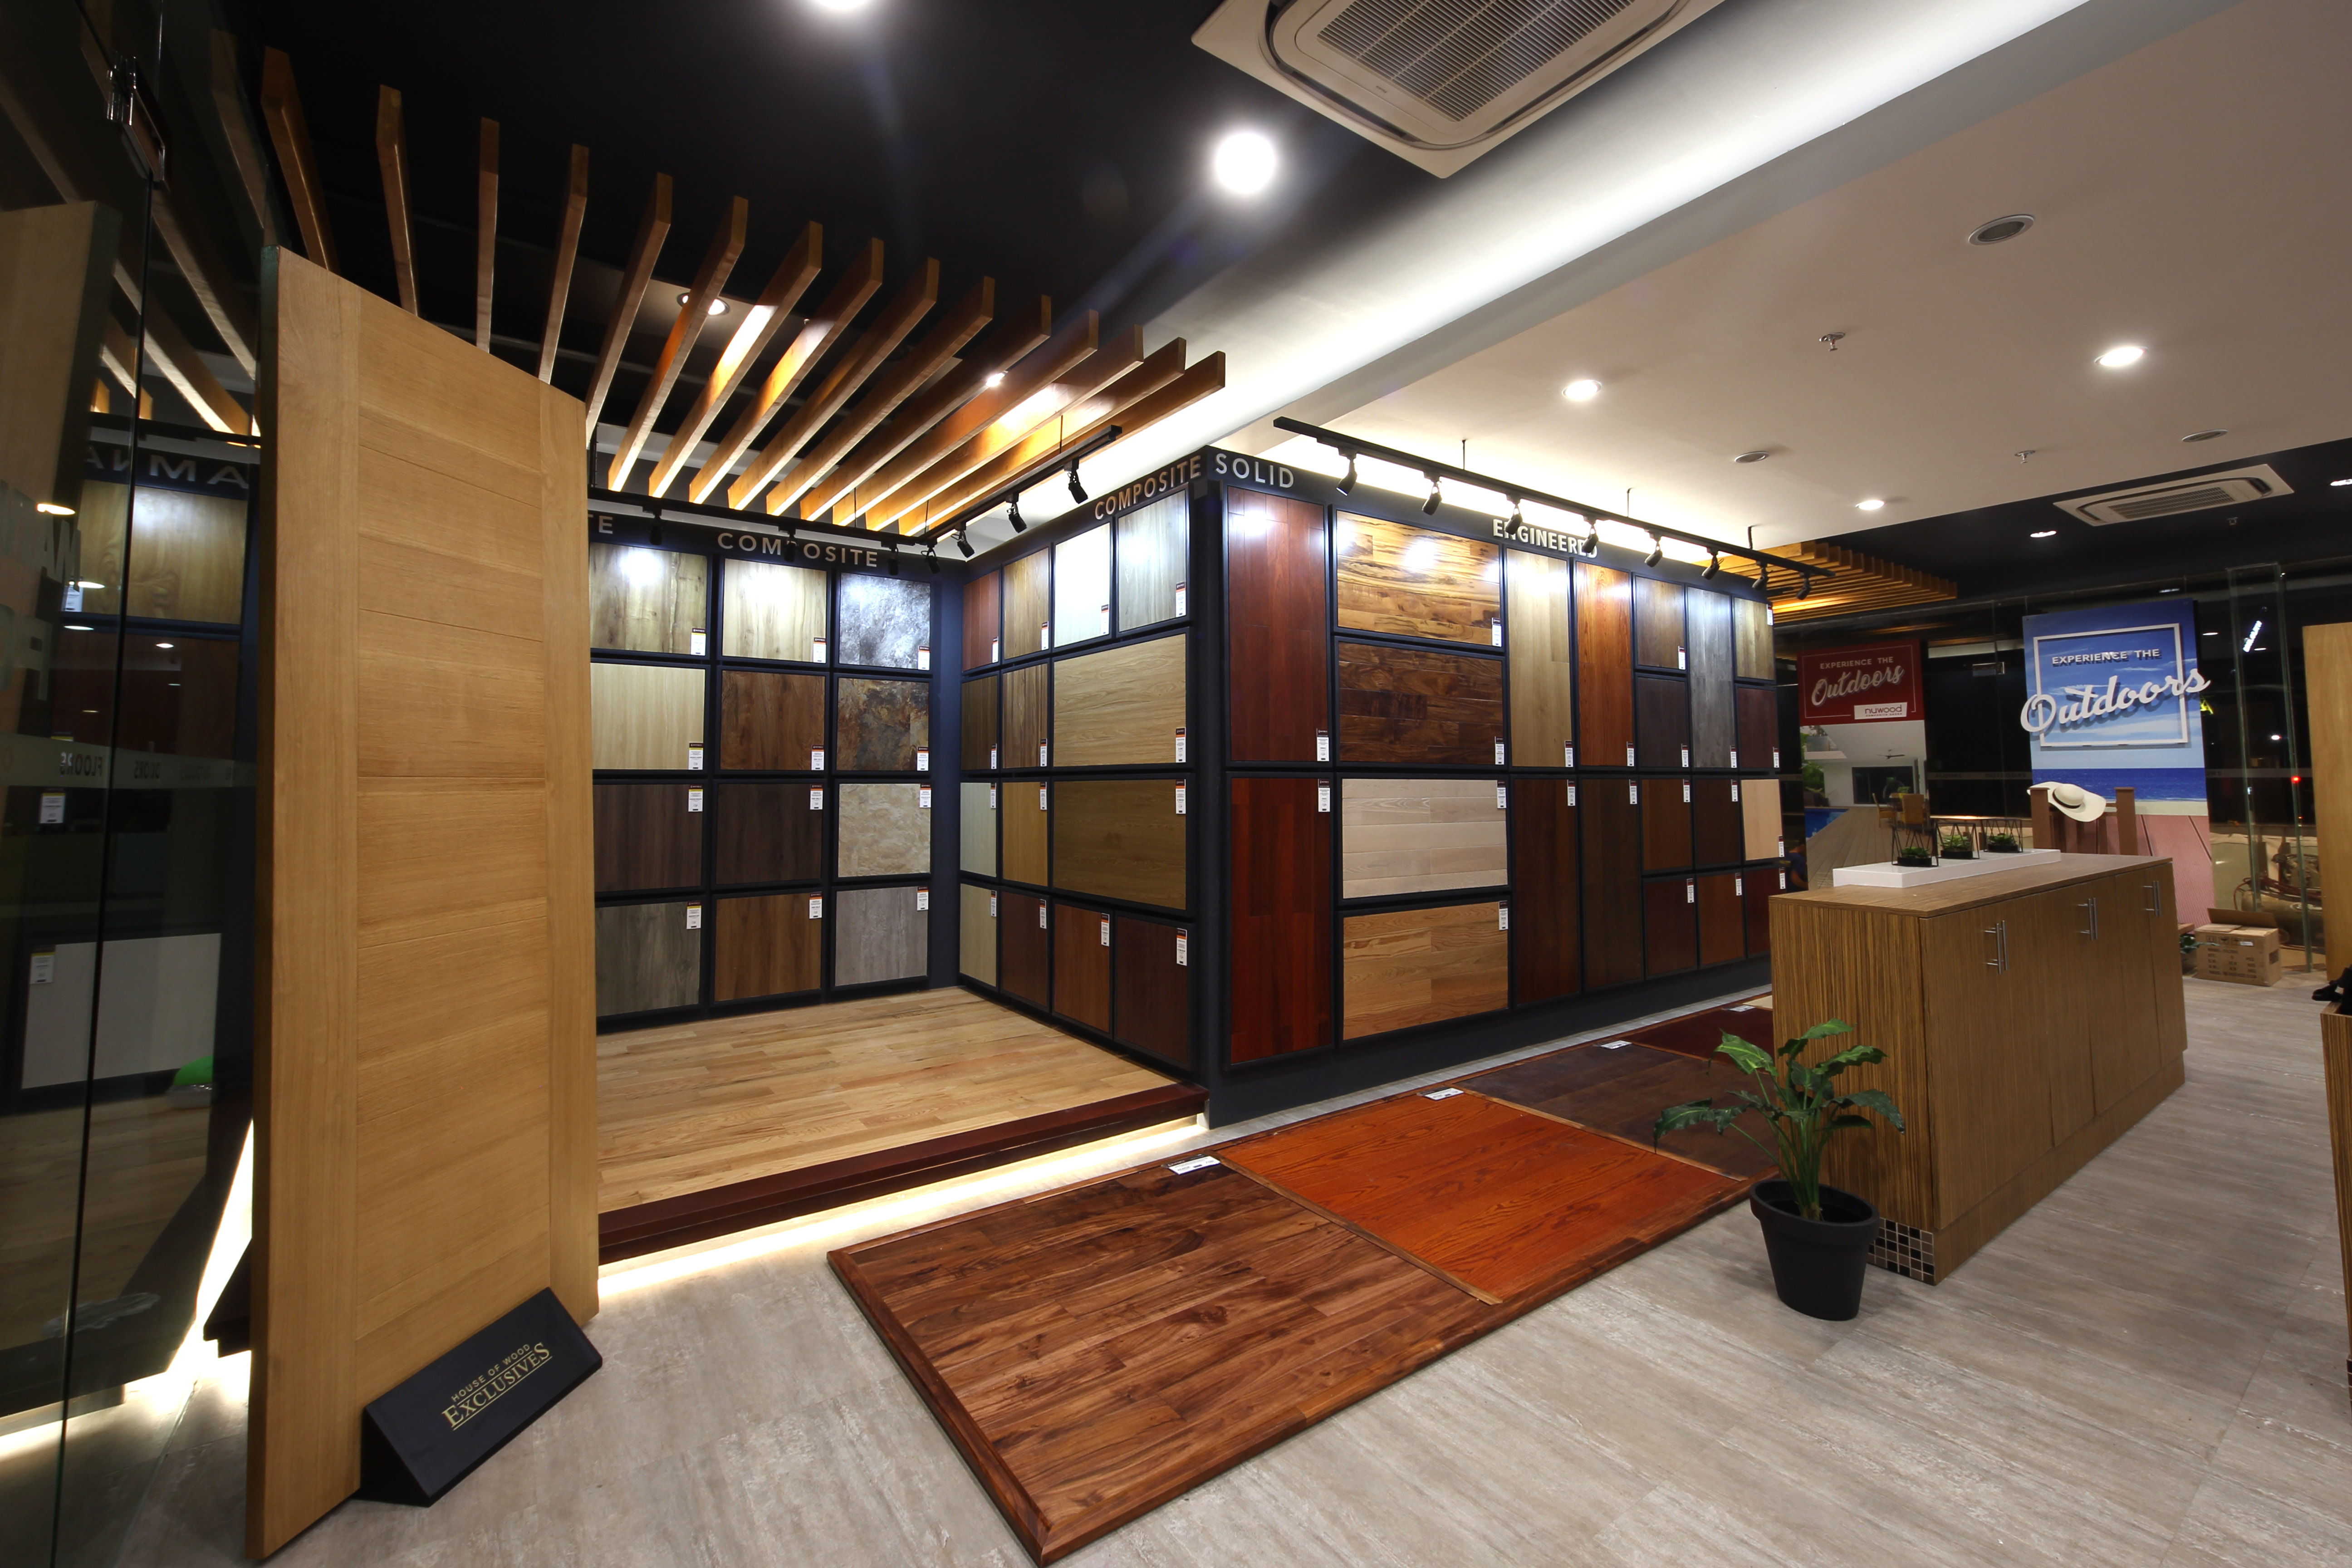 Matimco opens its ninth showroom in the country